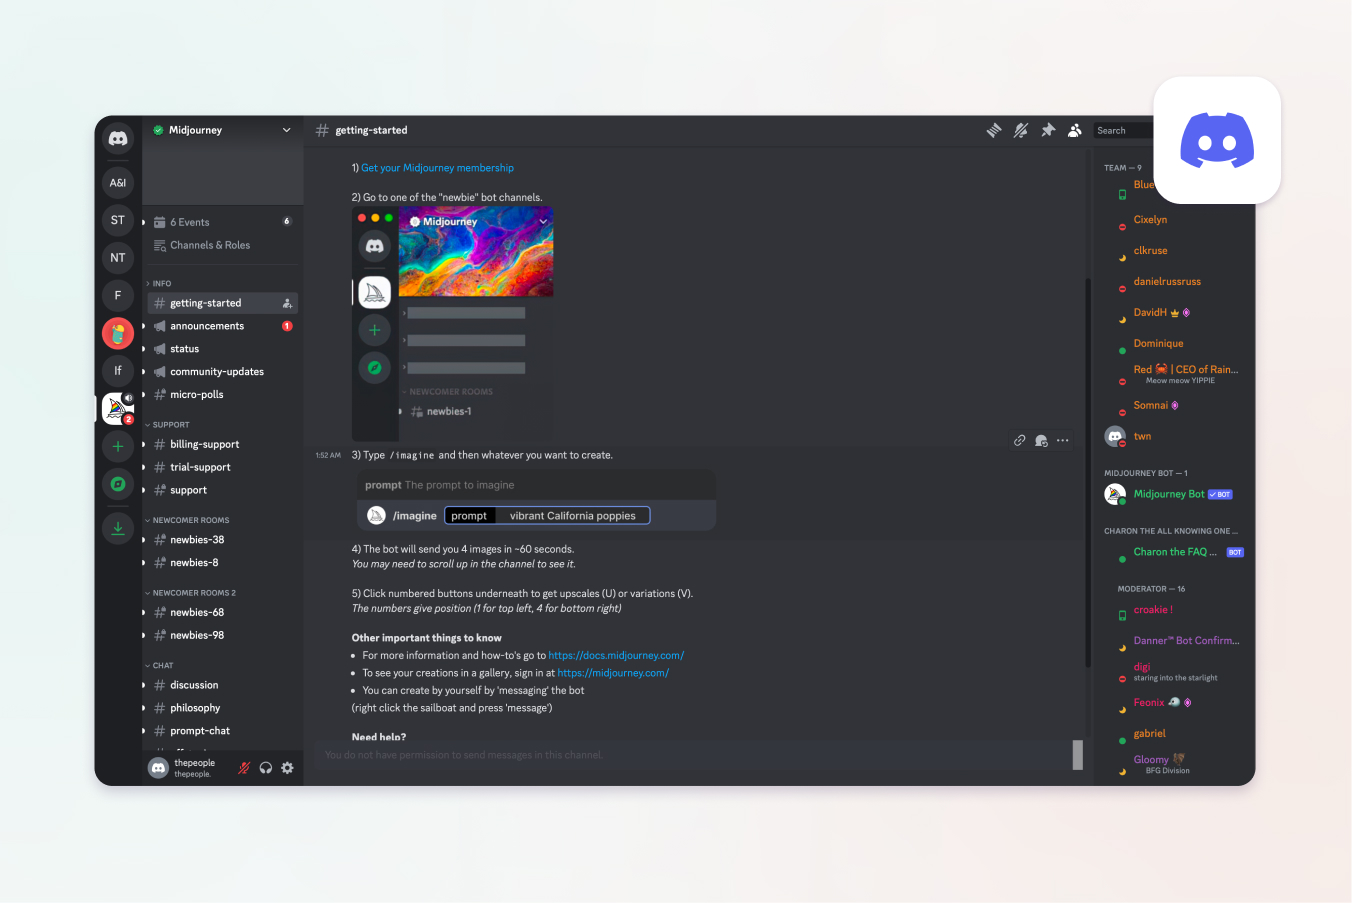 Discord user interface for community messages